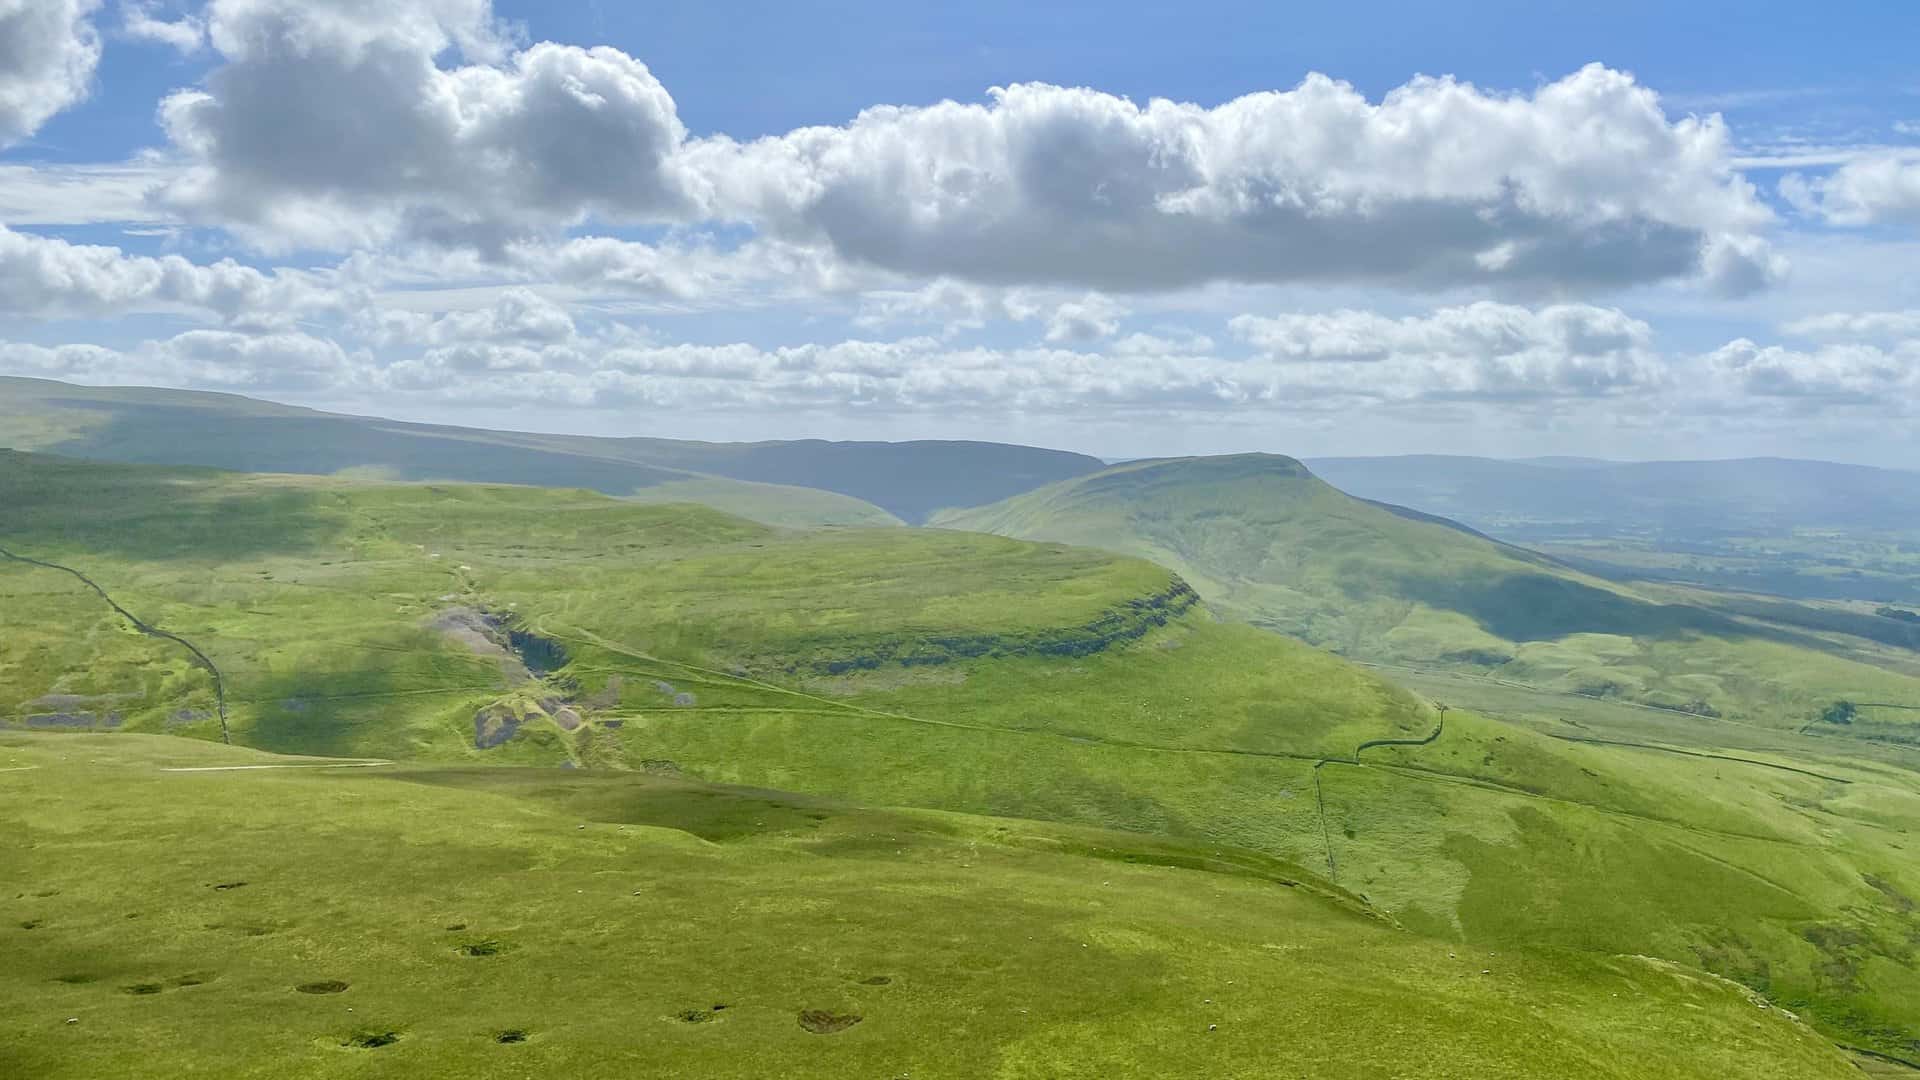 The view south-east from Murton Pike towards Delfekirk Scar, with Roman Fell in the distance, becomes even more breathtaking on North Pennines walks that weave through this picturesque landscape.